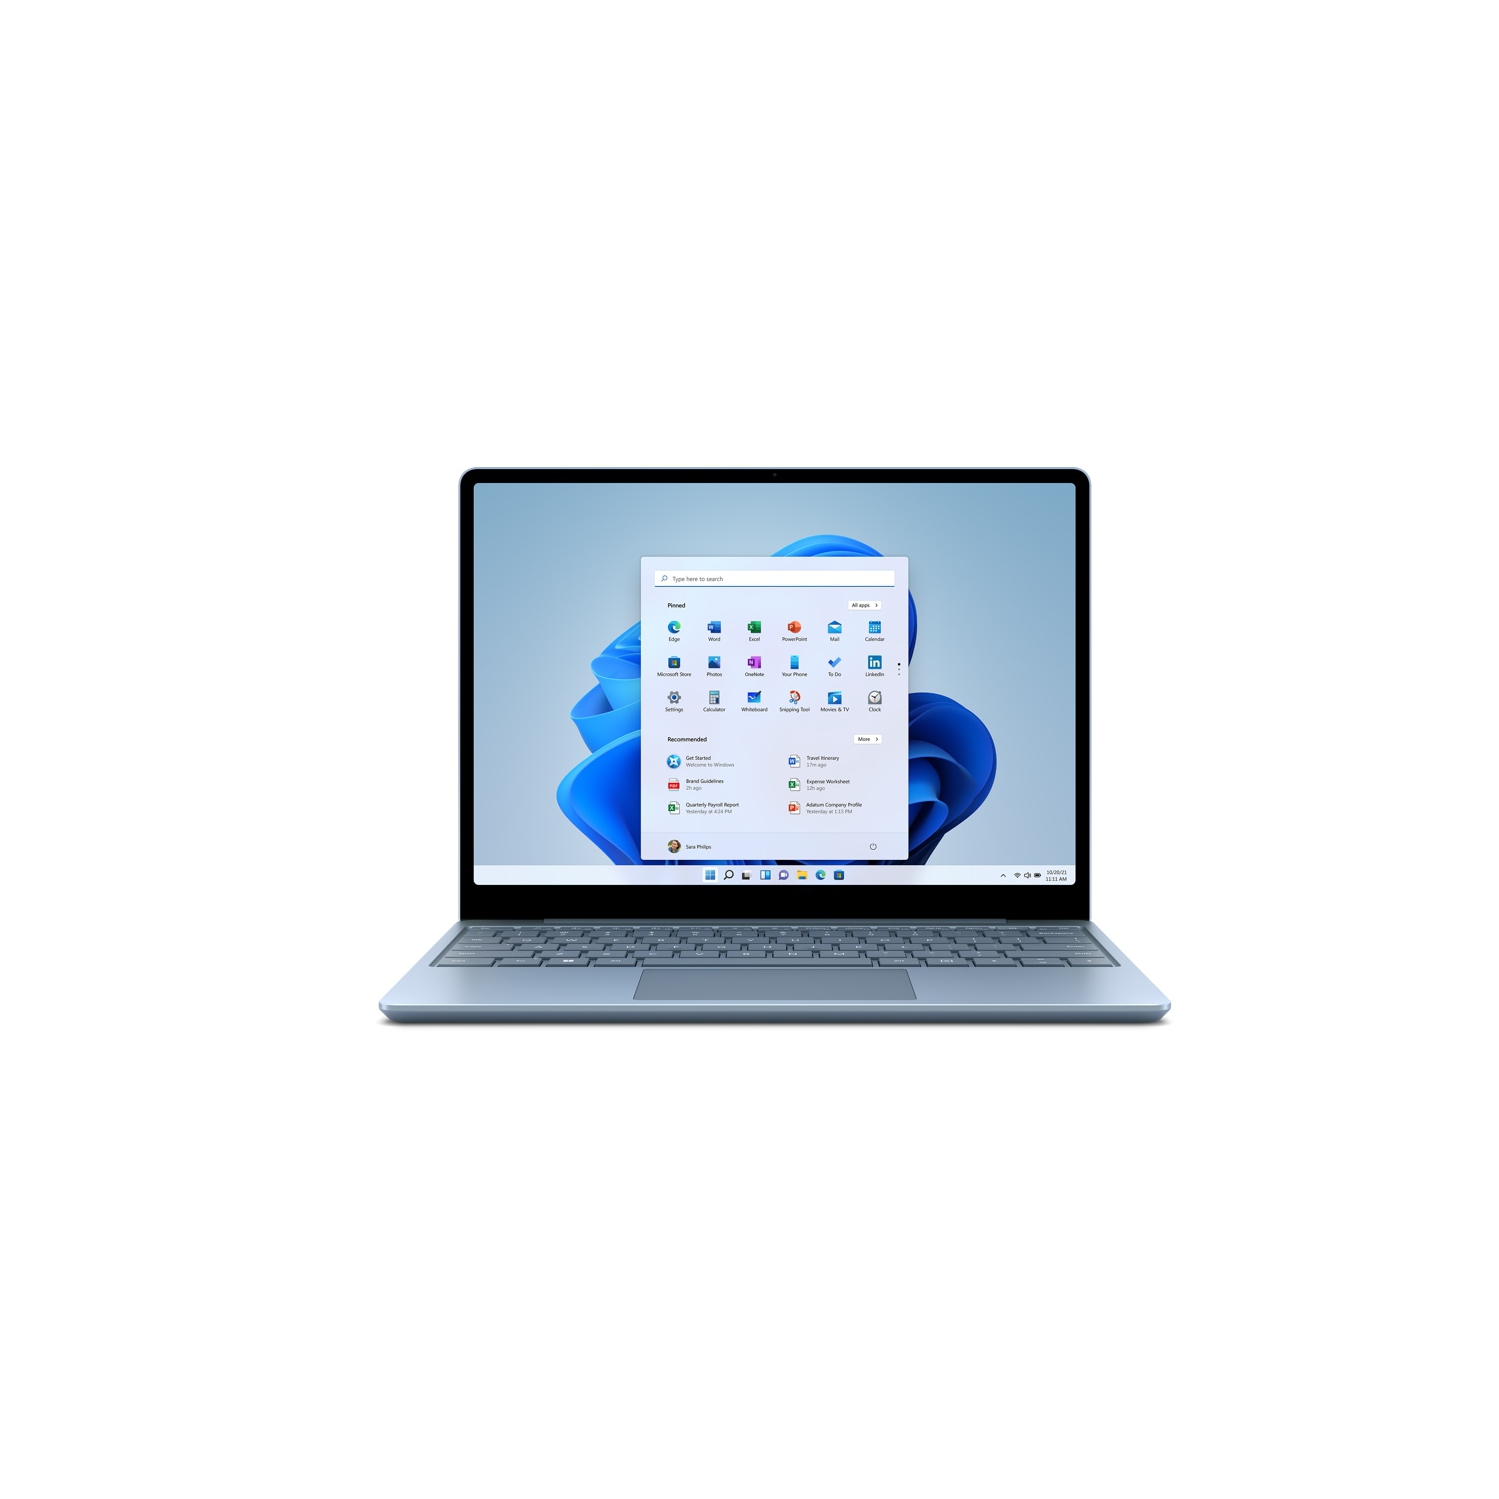 Refurbished (Excellent) Microsoft Surface Laptop Go 2 - Intel Core i5-1135G7/8GB LPDDR4x/128GB SSD/Windows 11 Home/12.4" Screen - Ice Blue